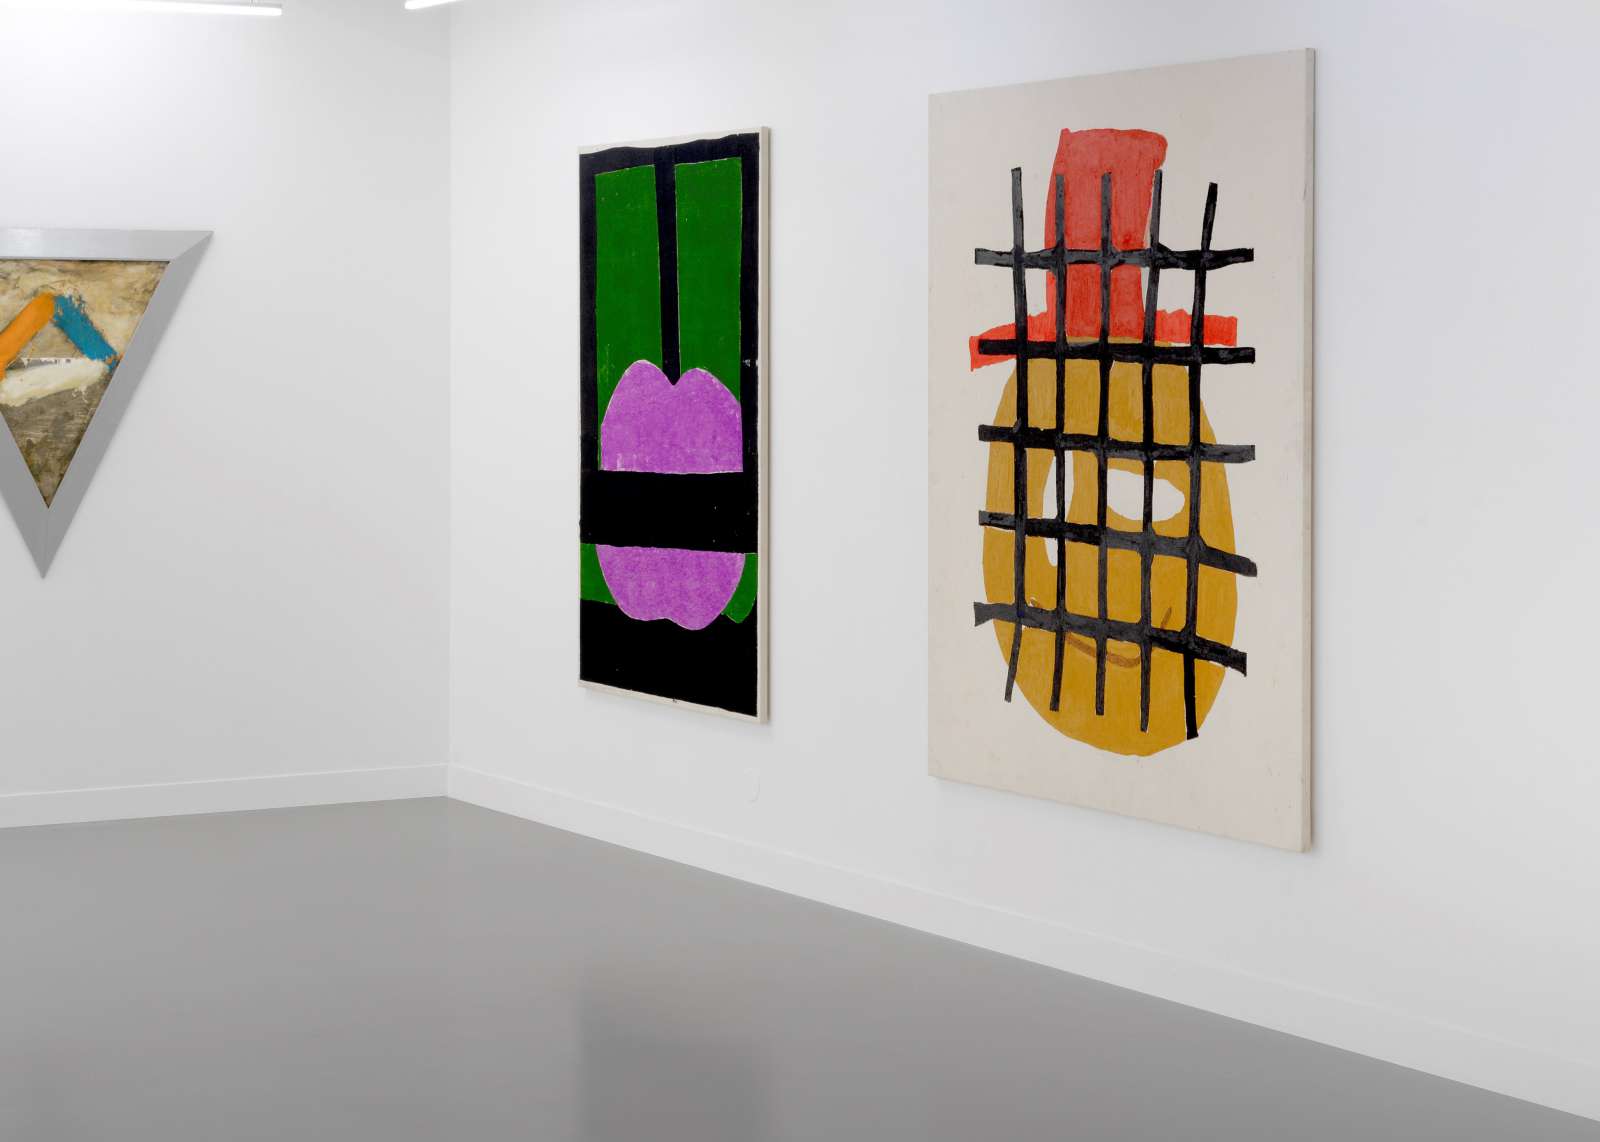  Installation view, First Choice, Spring 2020, Willem Baars Projects, Amsterdam